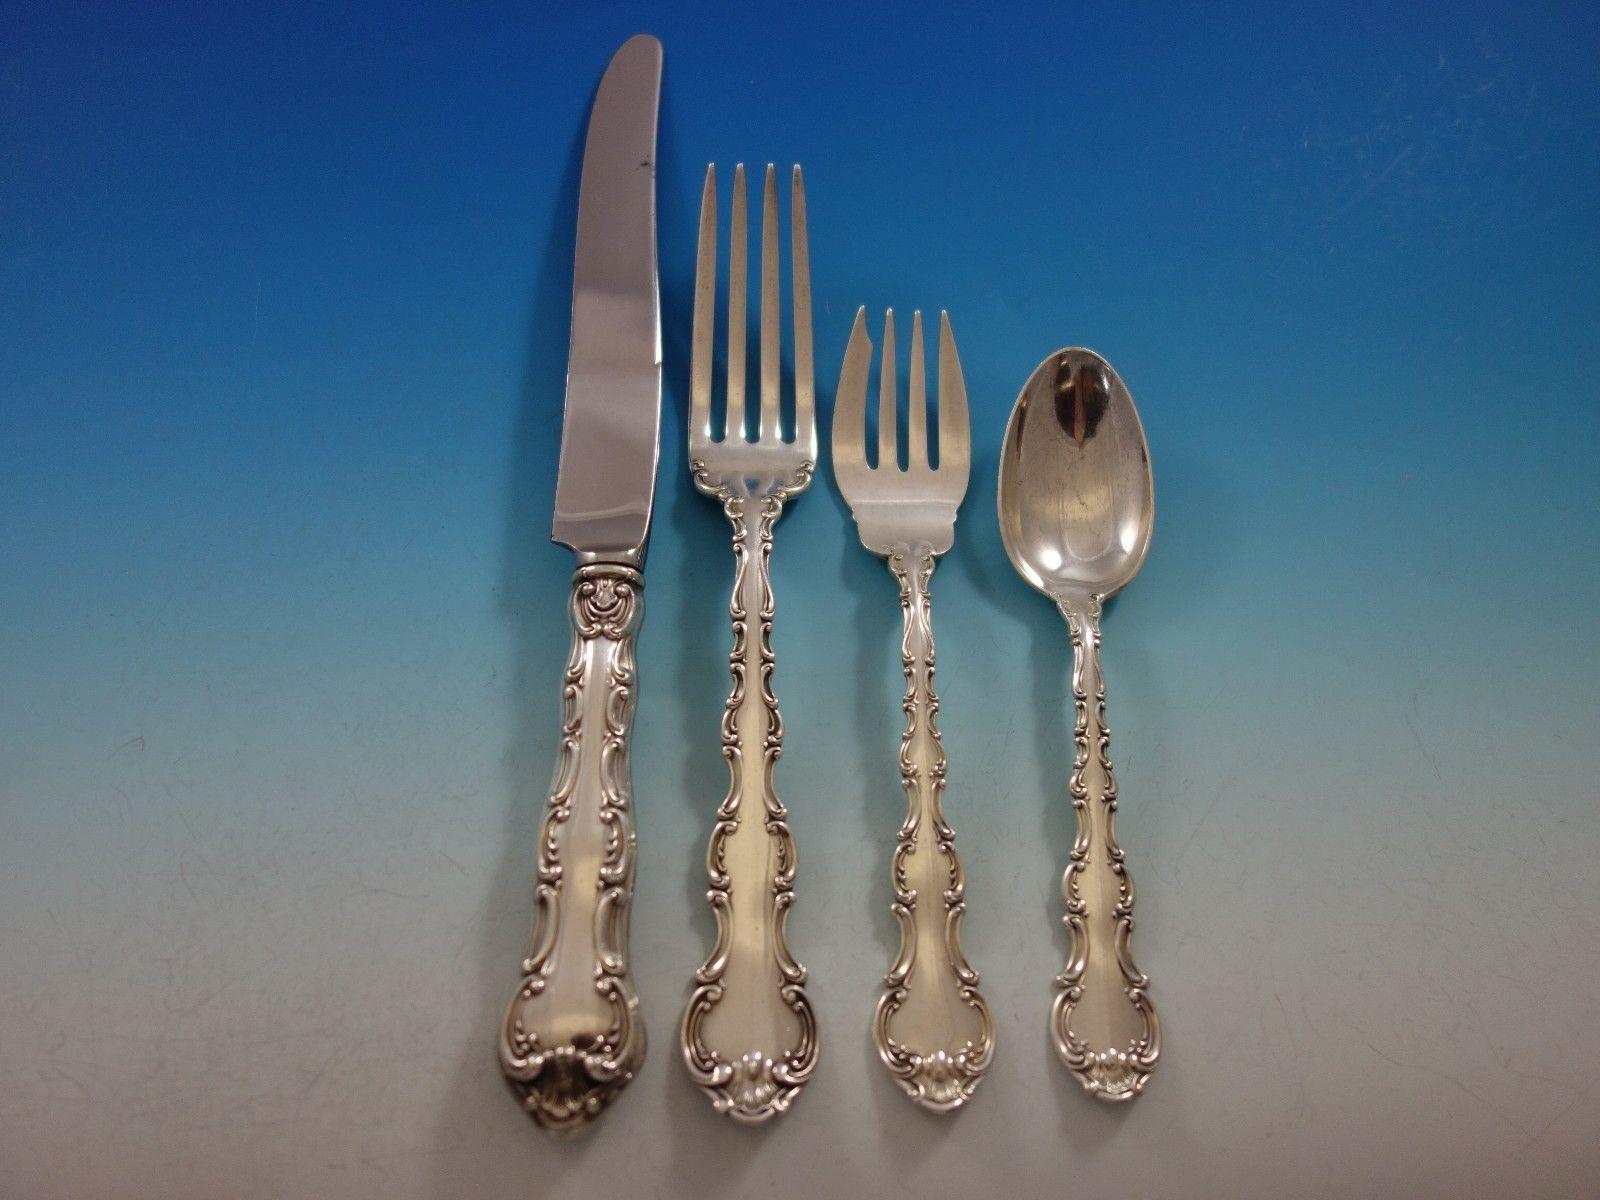 Large Strasbourg by Gorham Dinner & Luncheon sterling silver flatware set - 186 pieces. This set includes:

12 dinner knives, 9 5/8